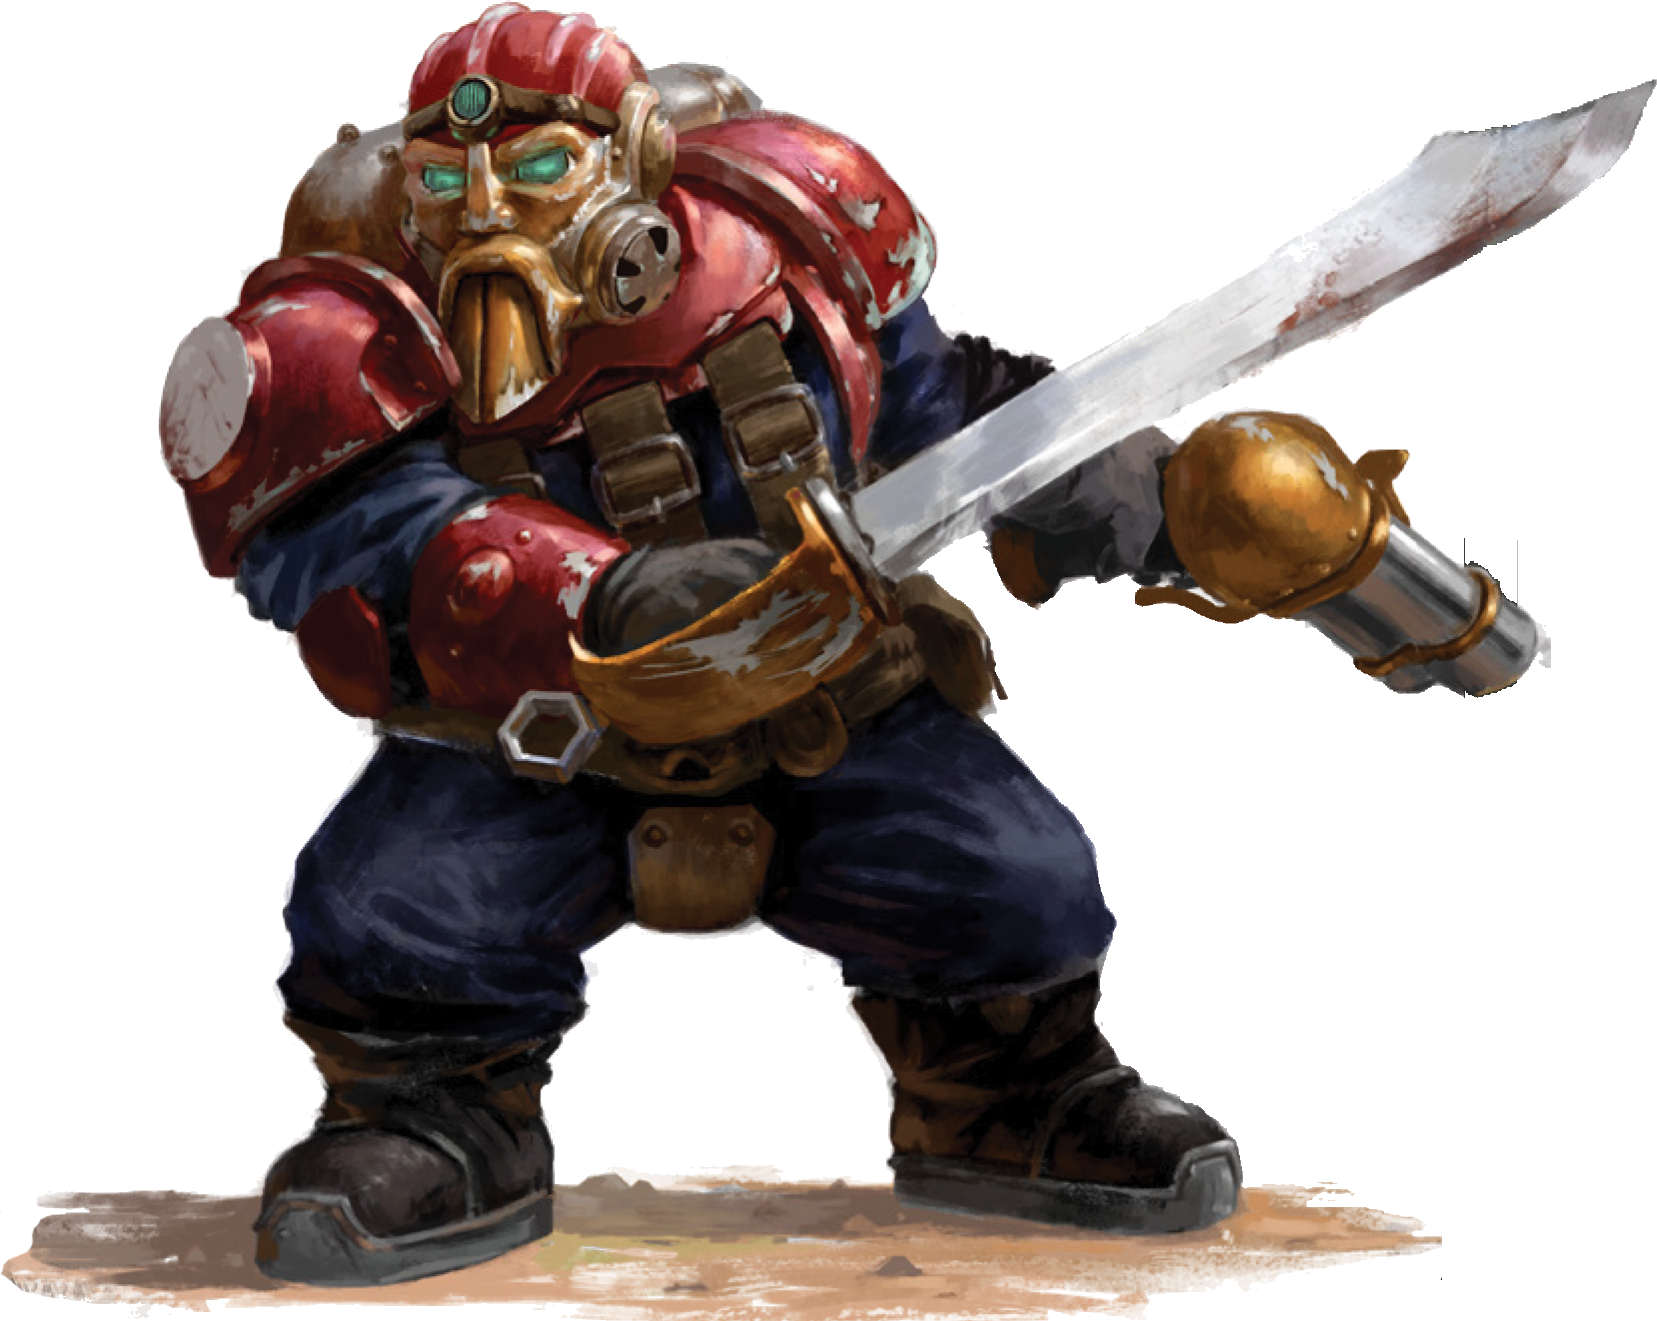 An image of the Warhammer character, Kharadron Overlord.